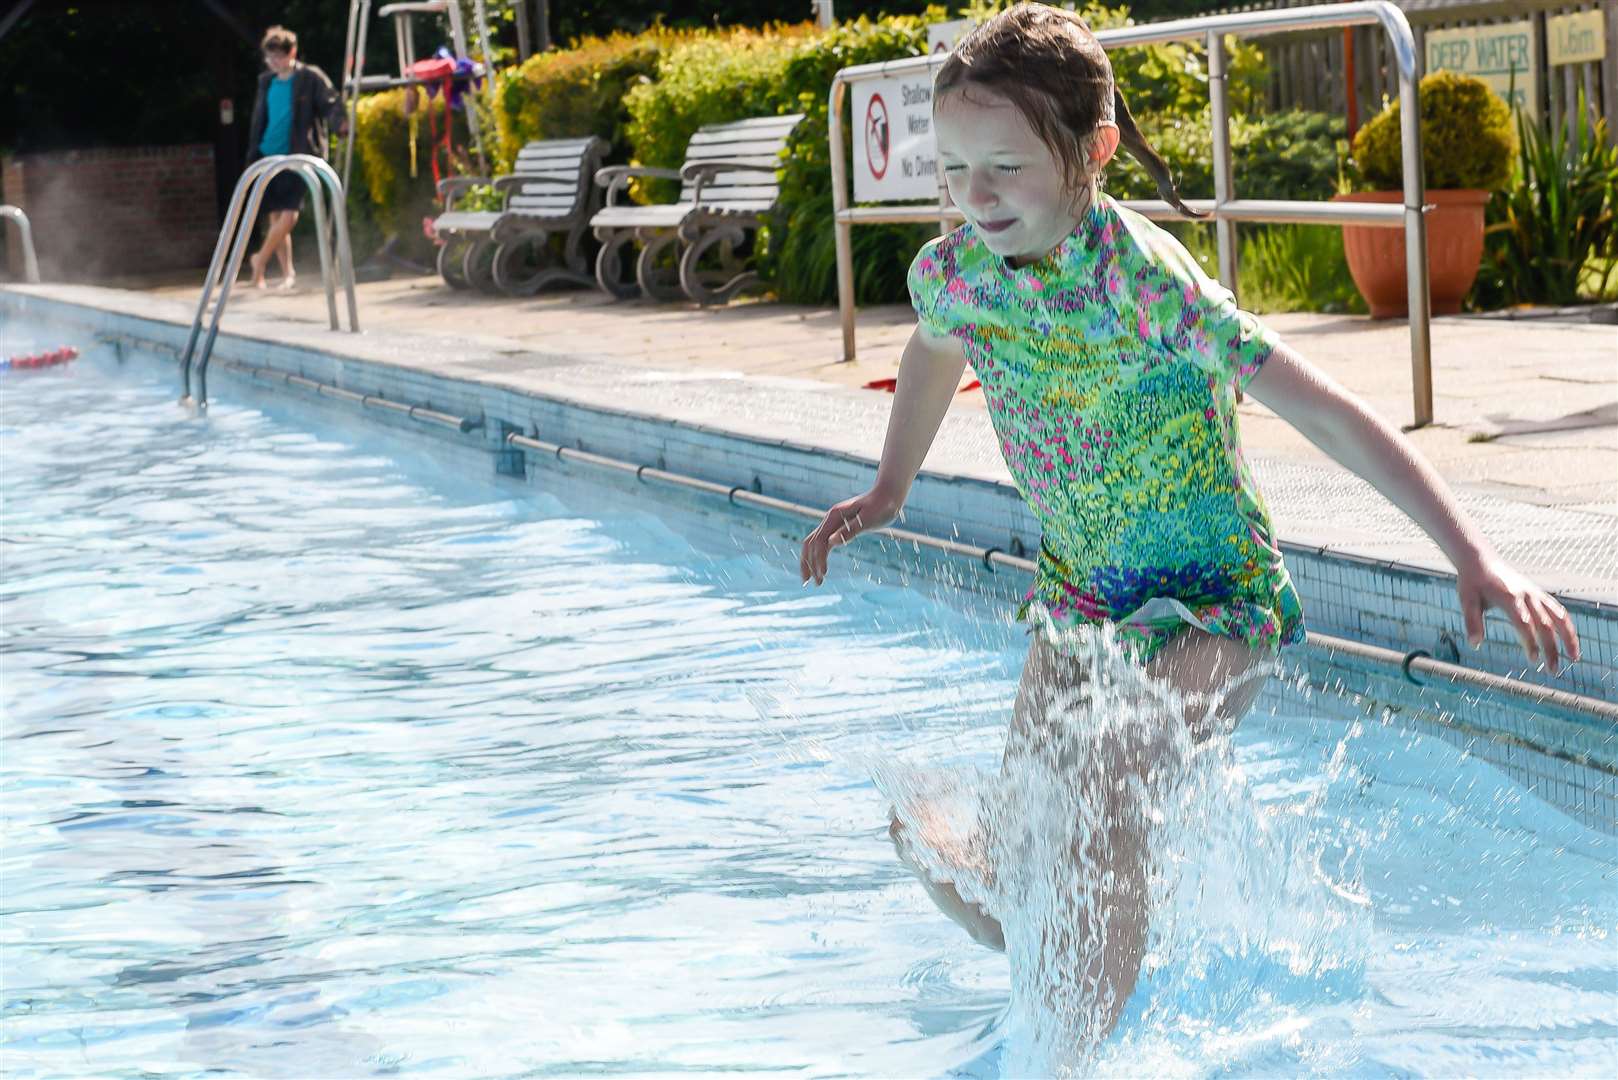 Get ready to make a splash as the temperatures soar!